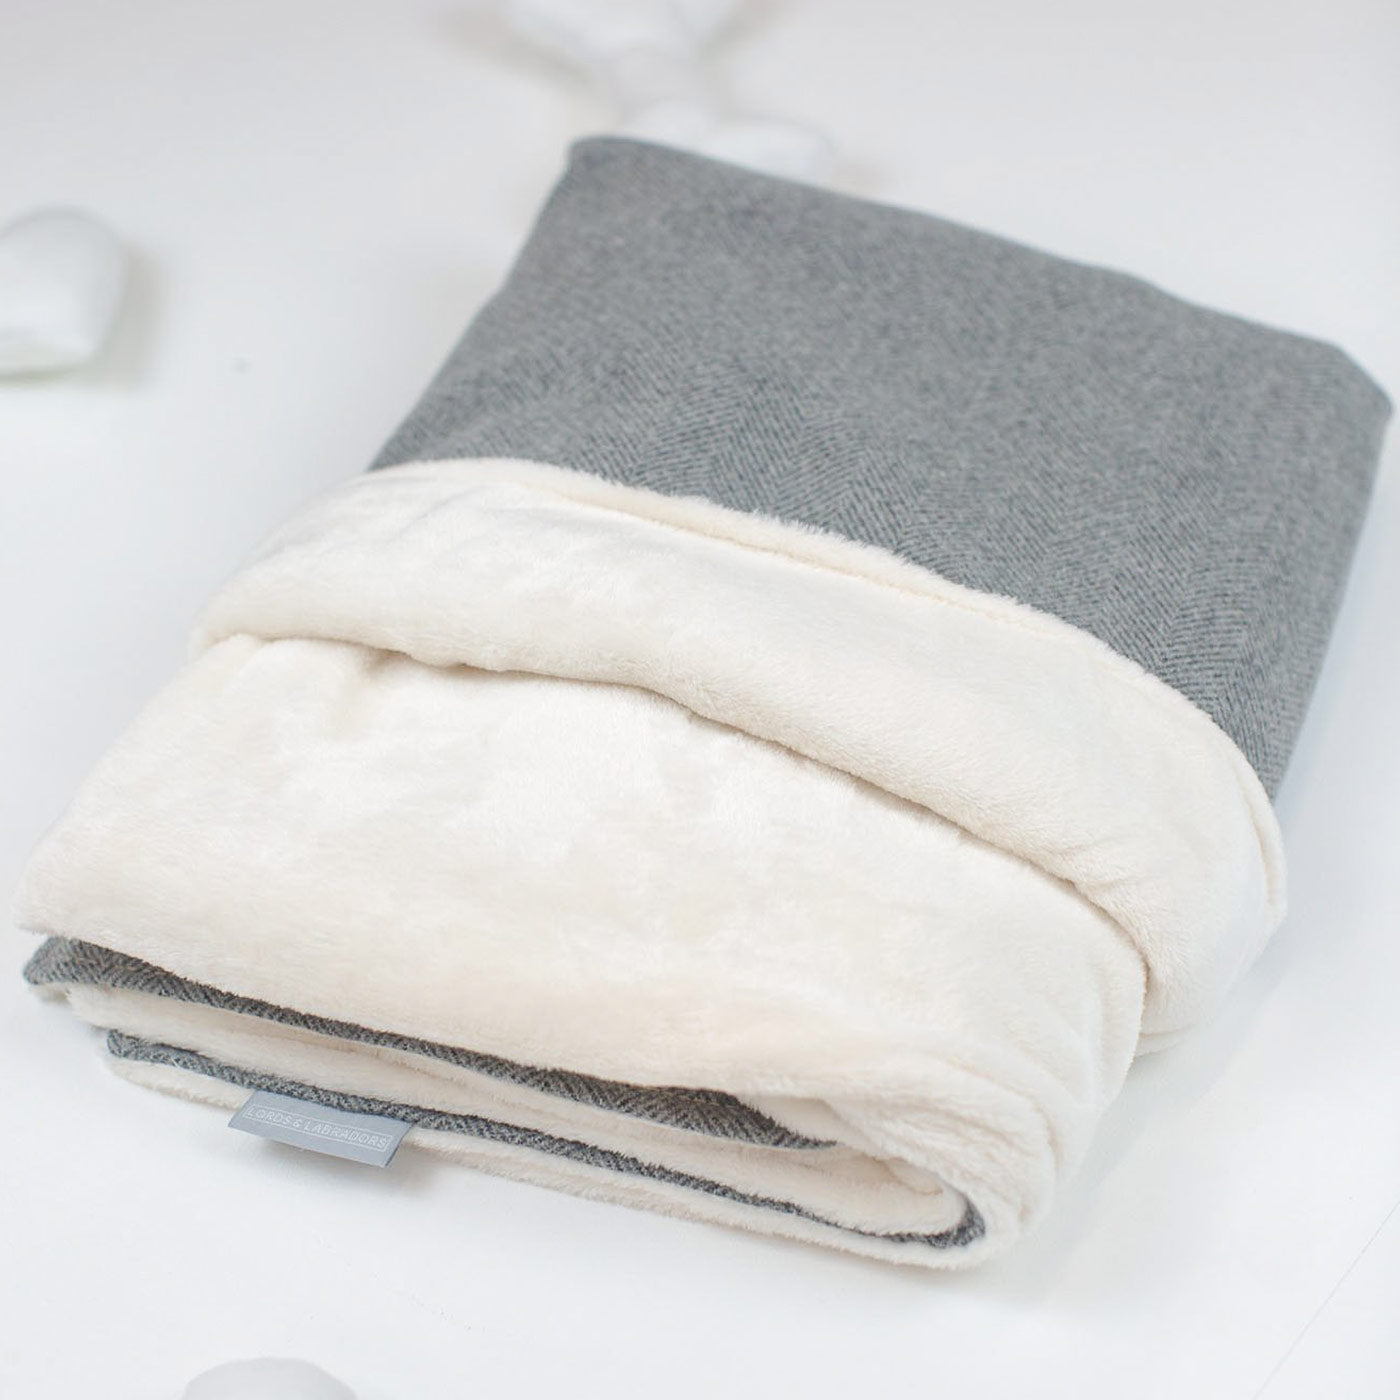  Super Soft Sherpa & Teddy Fleece Lining, Our Luxury Cat & Kitten Blanket In Stunning Pewter Herringbone Tweed The Perfect Cat Bed Accessory! Available To Personalise at Lords & Labradors